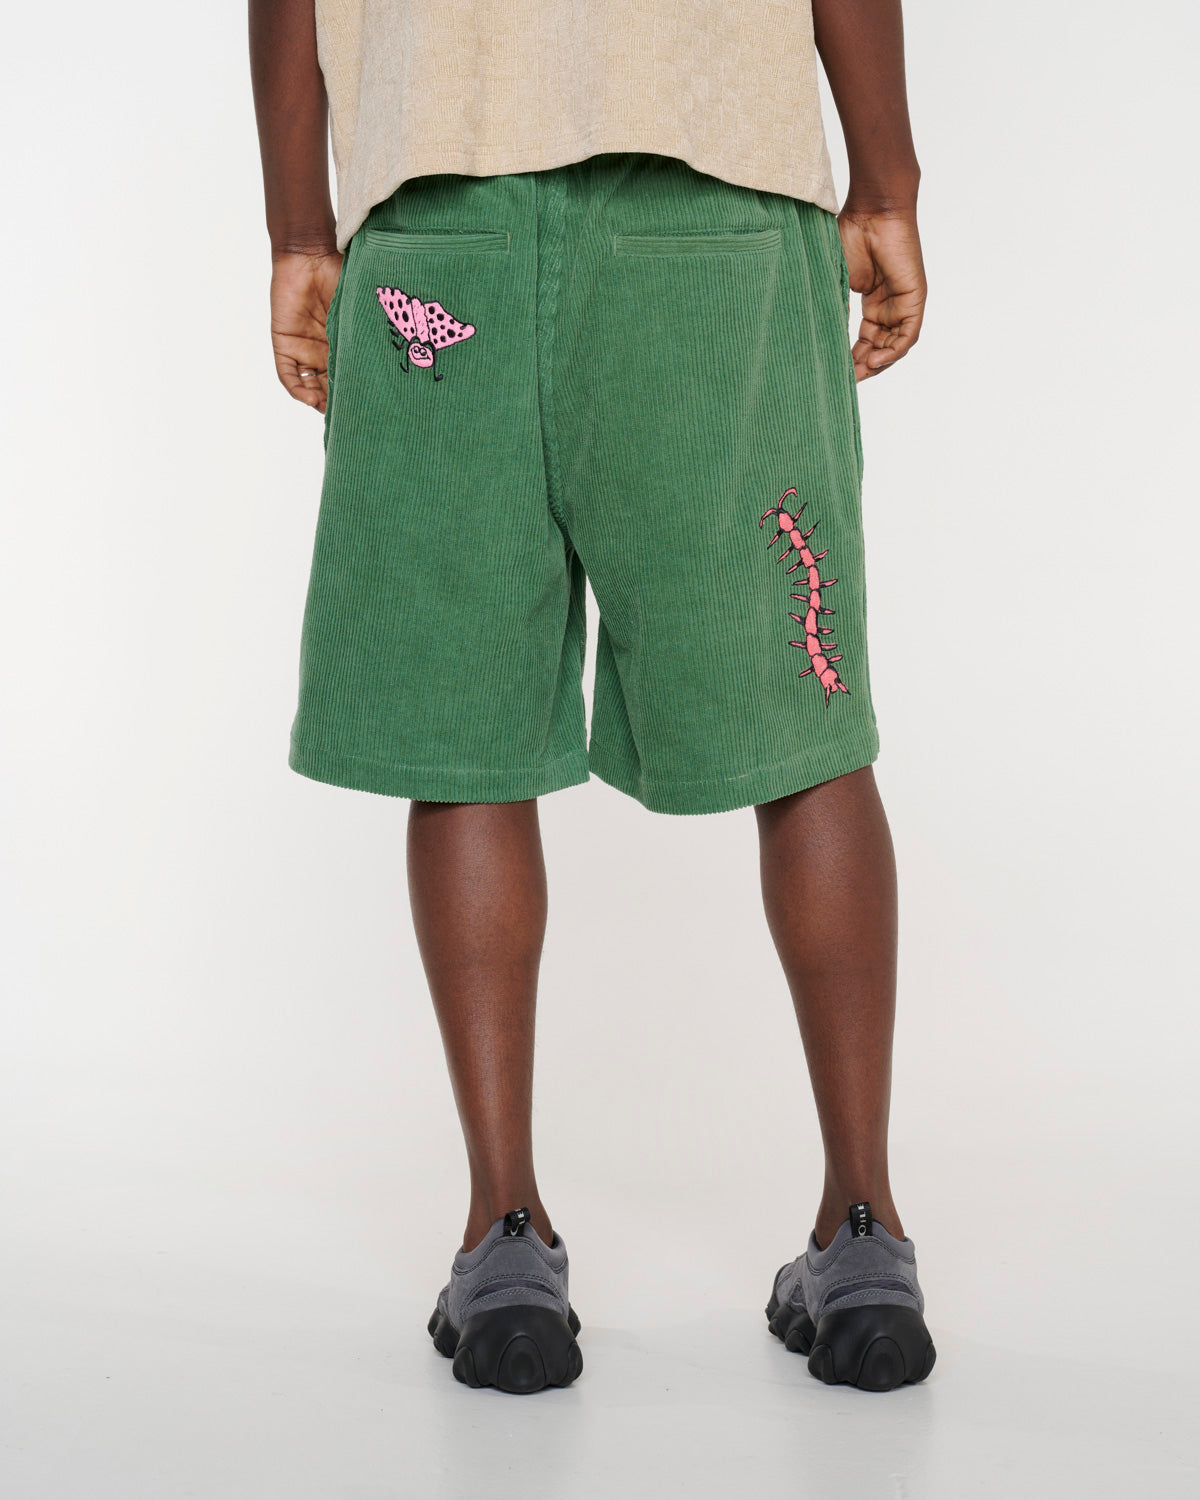 Buggin' Out Baggy Climber Short - Olive 6